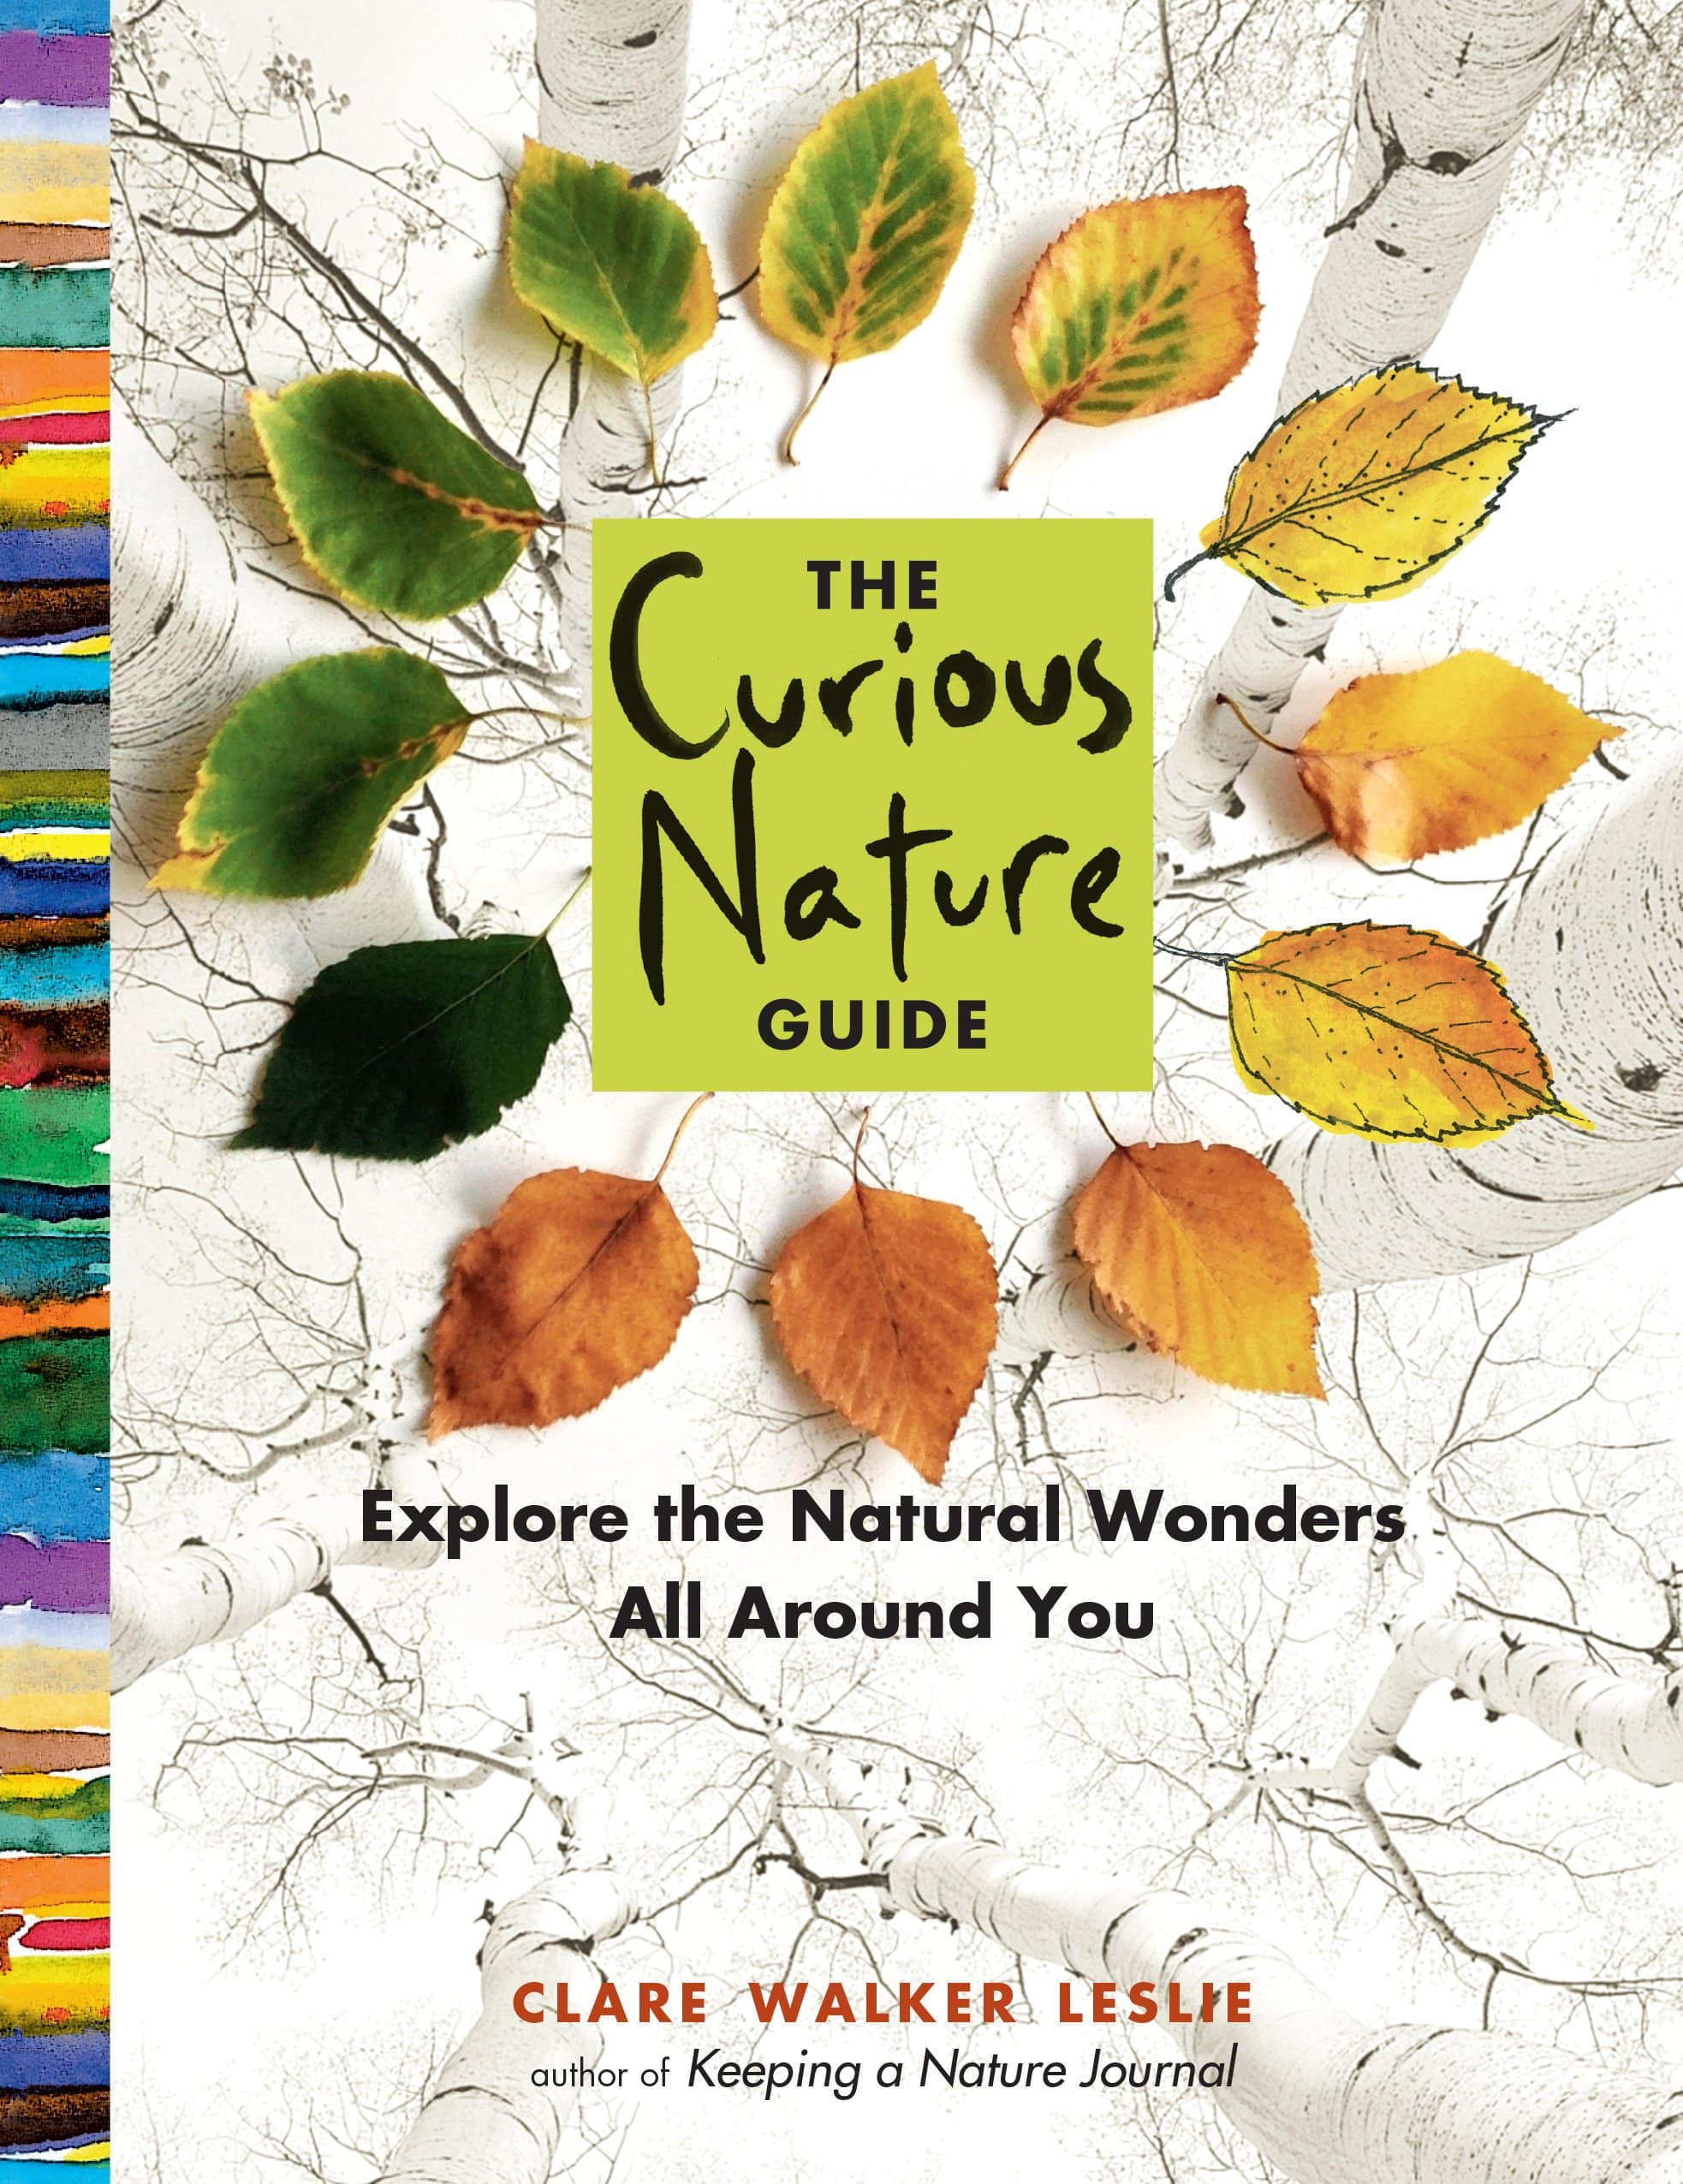 DEAL ALERT: The Curious Nature Guide: Explore the Natural Wonders All Around You – 42% off!